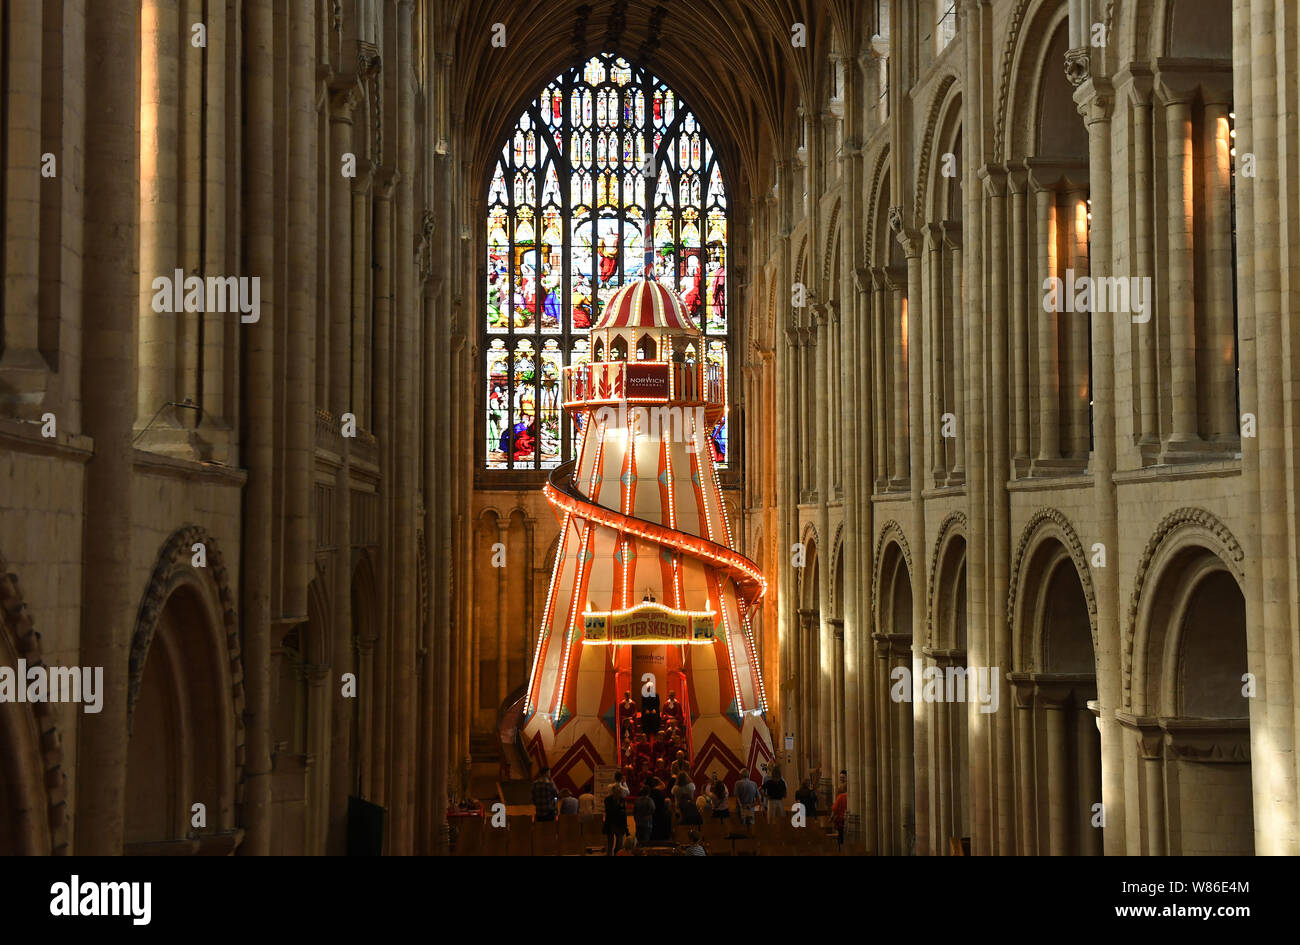 A 40ft helter skelter installed inside Norwich Cathedral as part of the Seeing It Differently project which aims to give people the chance to experience the Cathedral in an entirely new way and open up conversations about faith. Stock Photo